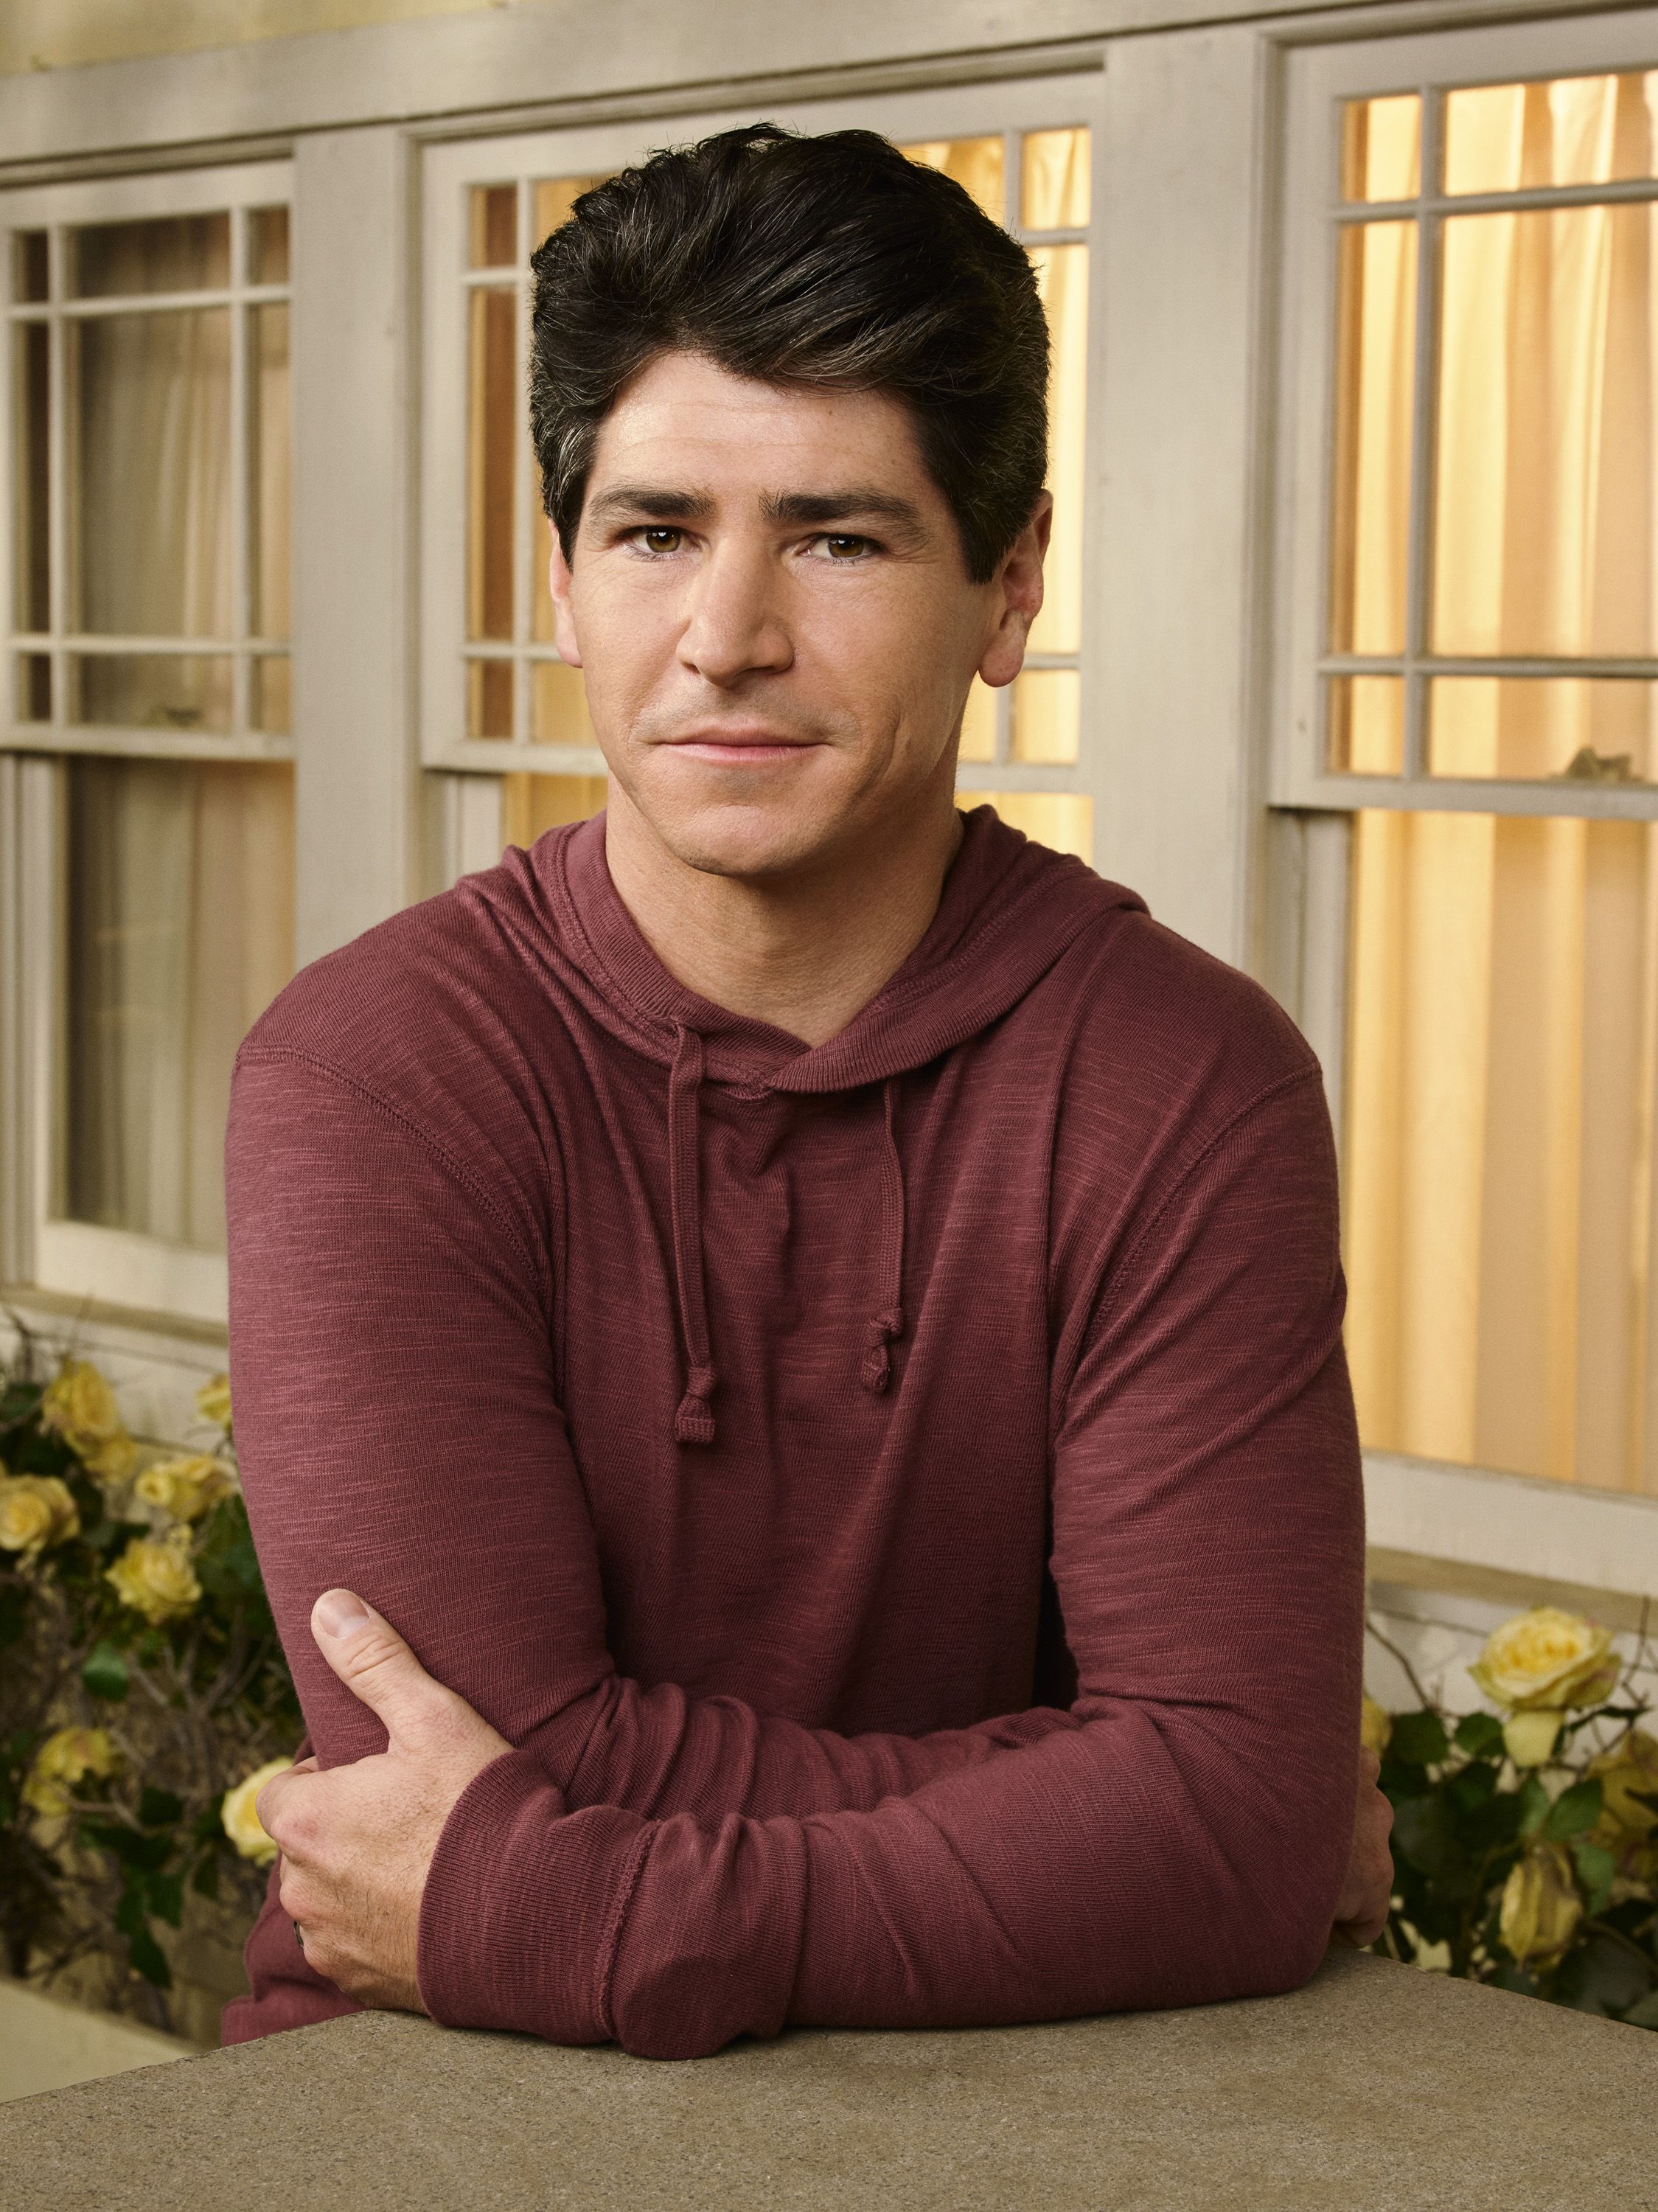 The Conners' Star Michael Fishman Addresses Series Exit